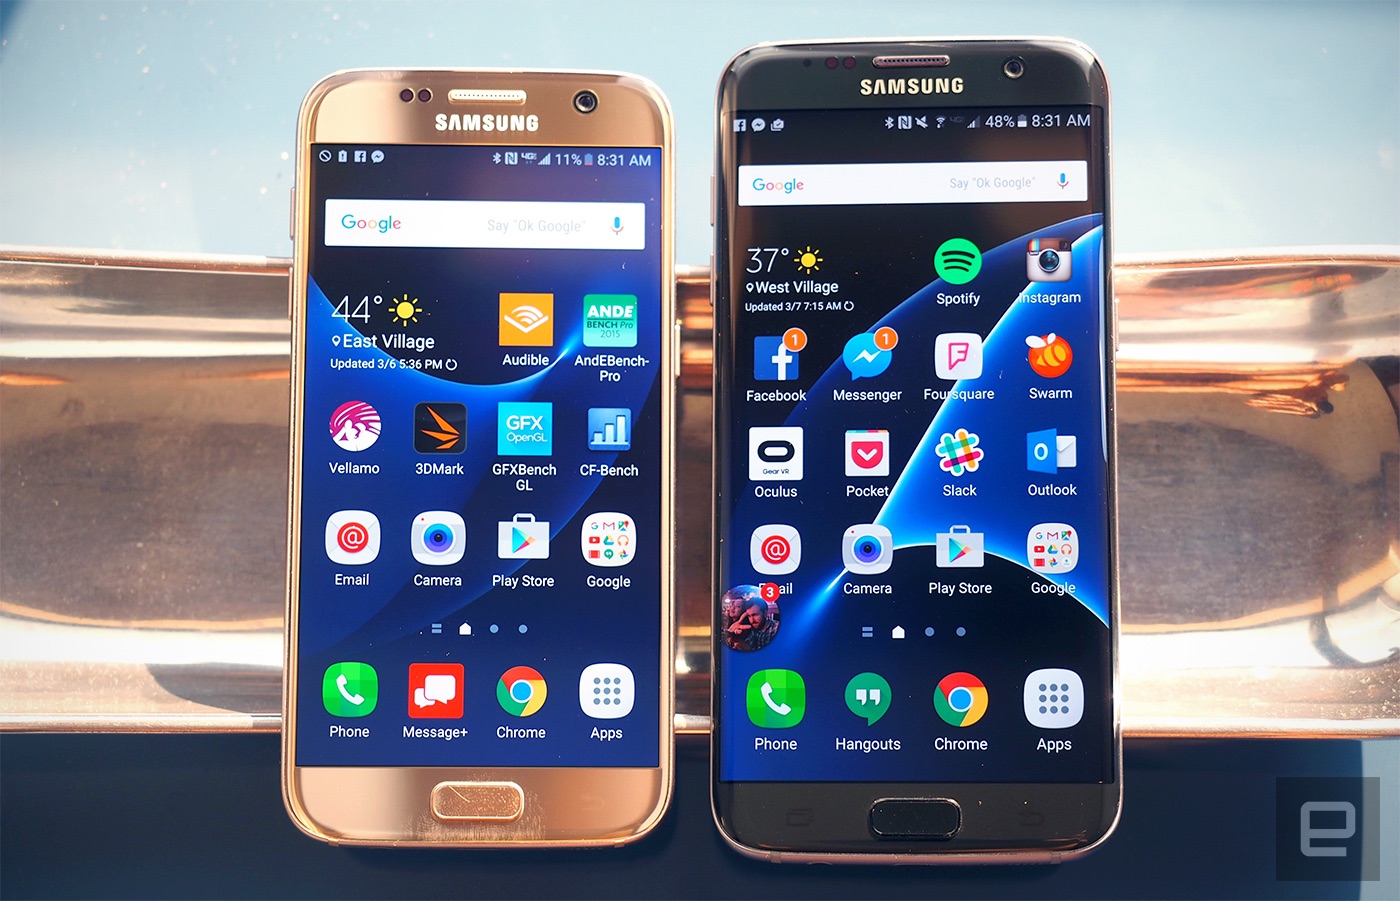 Mini review video: Our take on the Galaxy S7 Edge, in just a minute